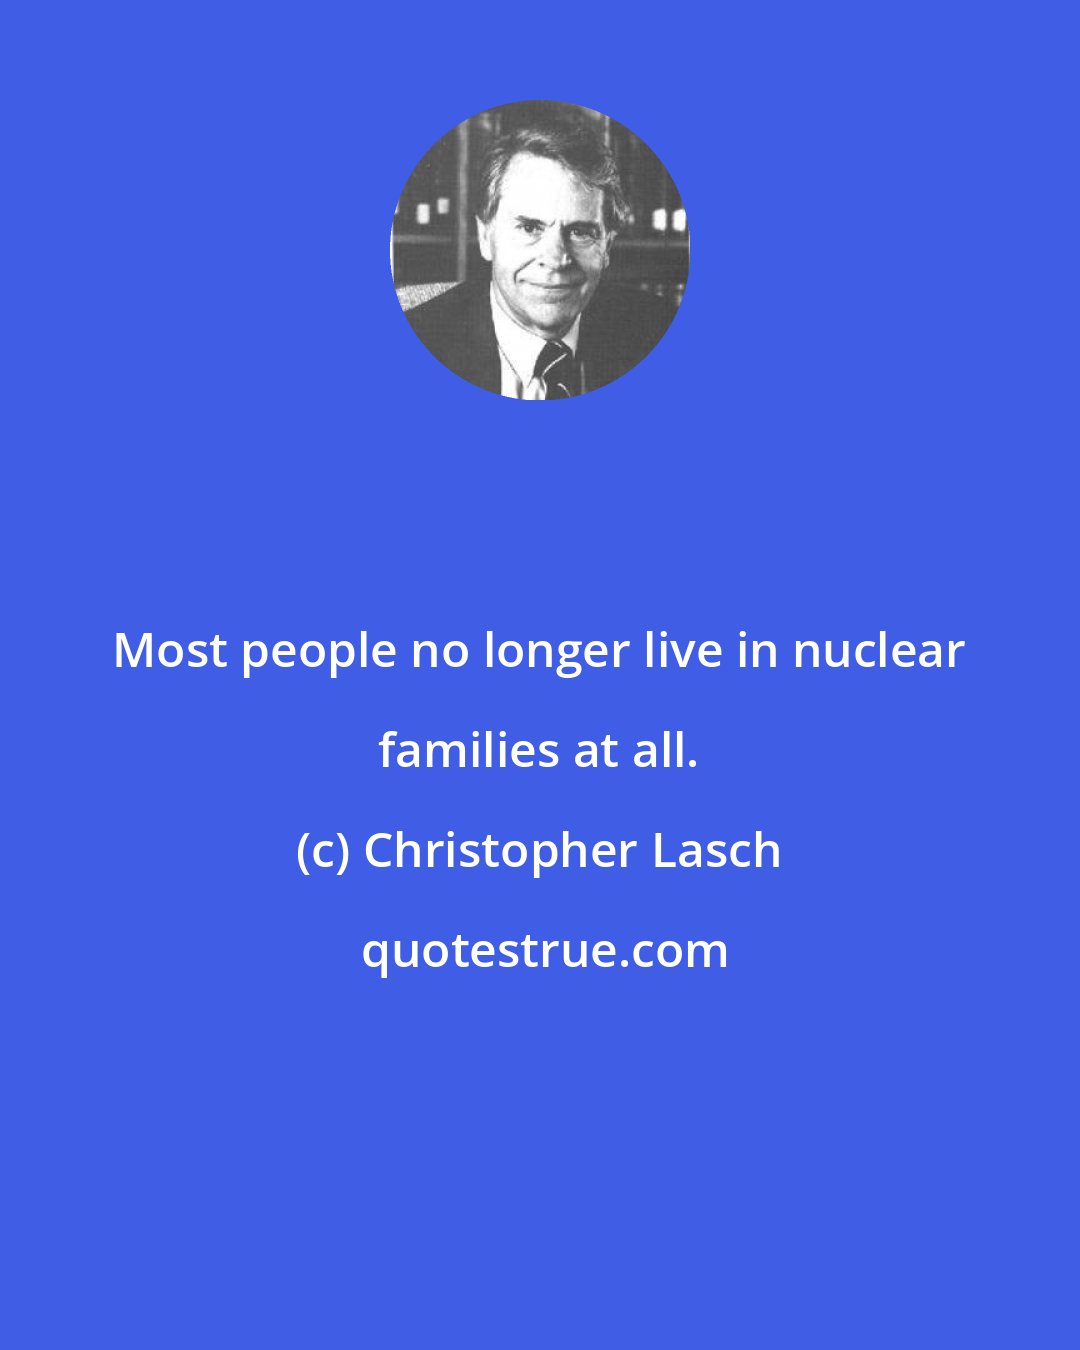 Christopher Lasch: Most people no longer live in nuclear families at all.